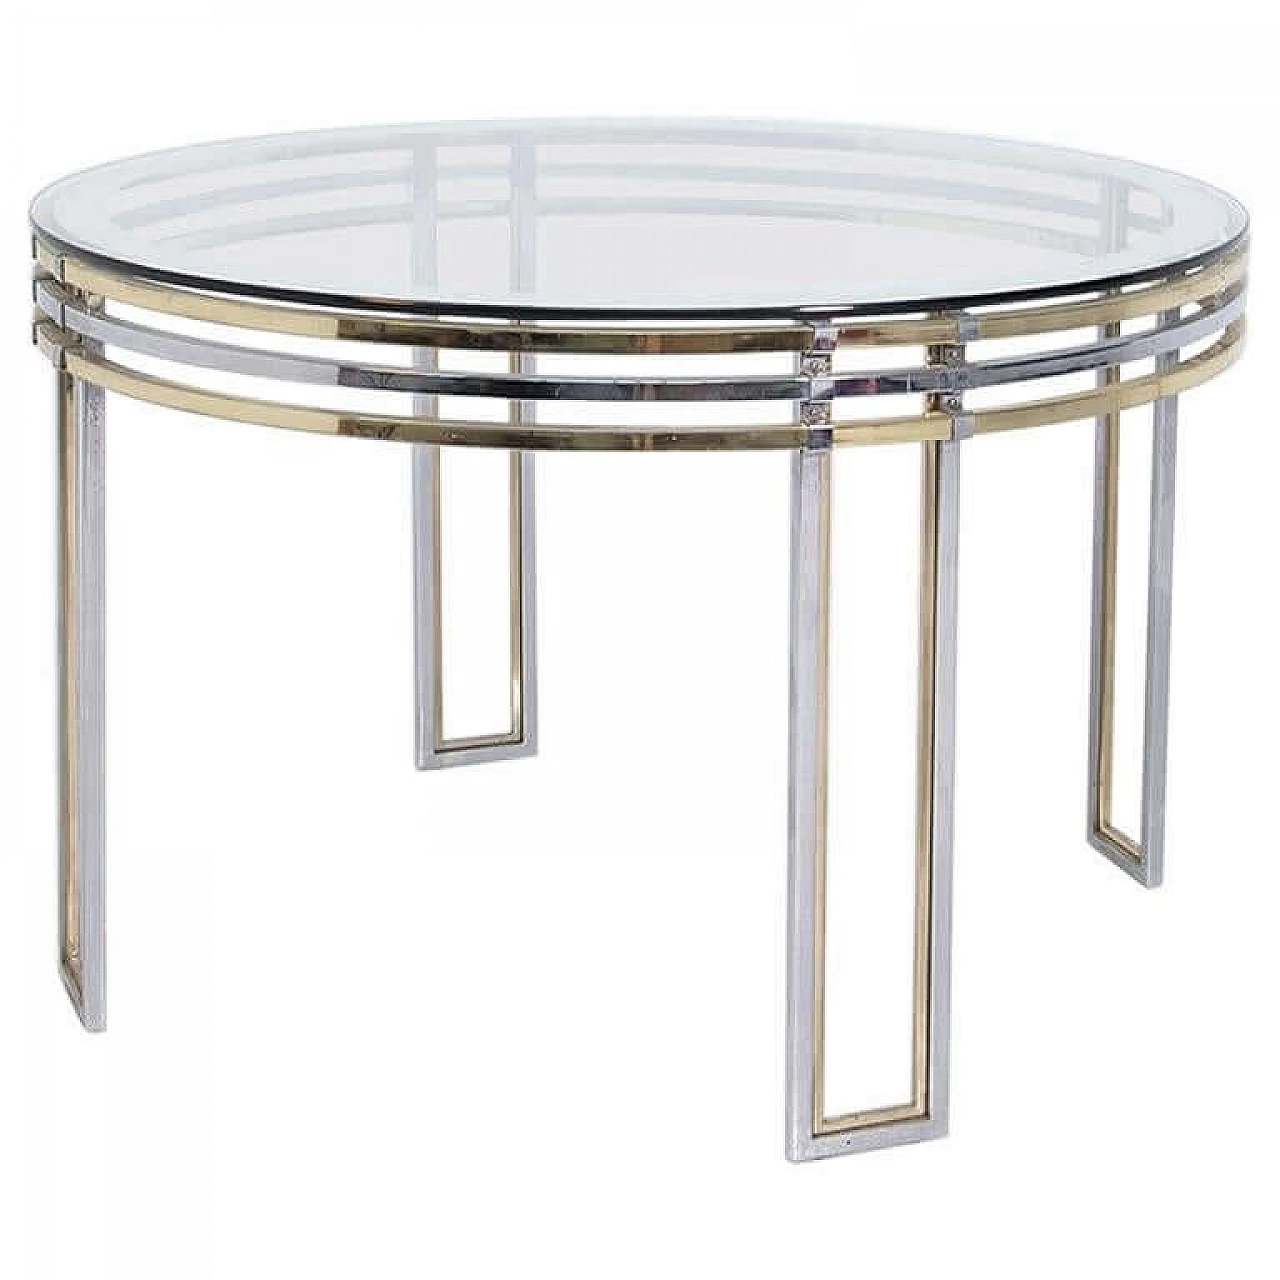 Romeo Rega's round dining table in brass, steel and decorated glass, 1970s 1382584